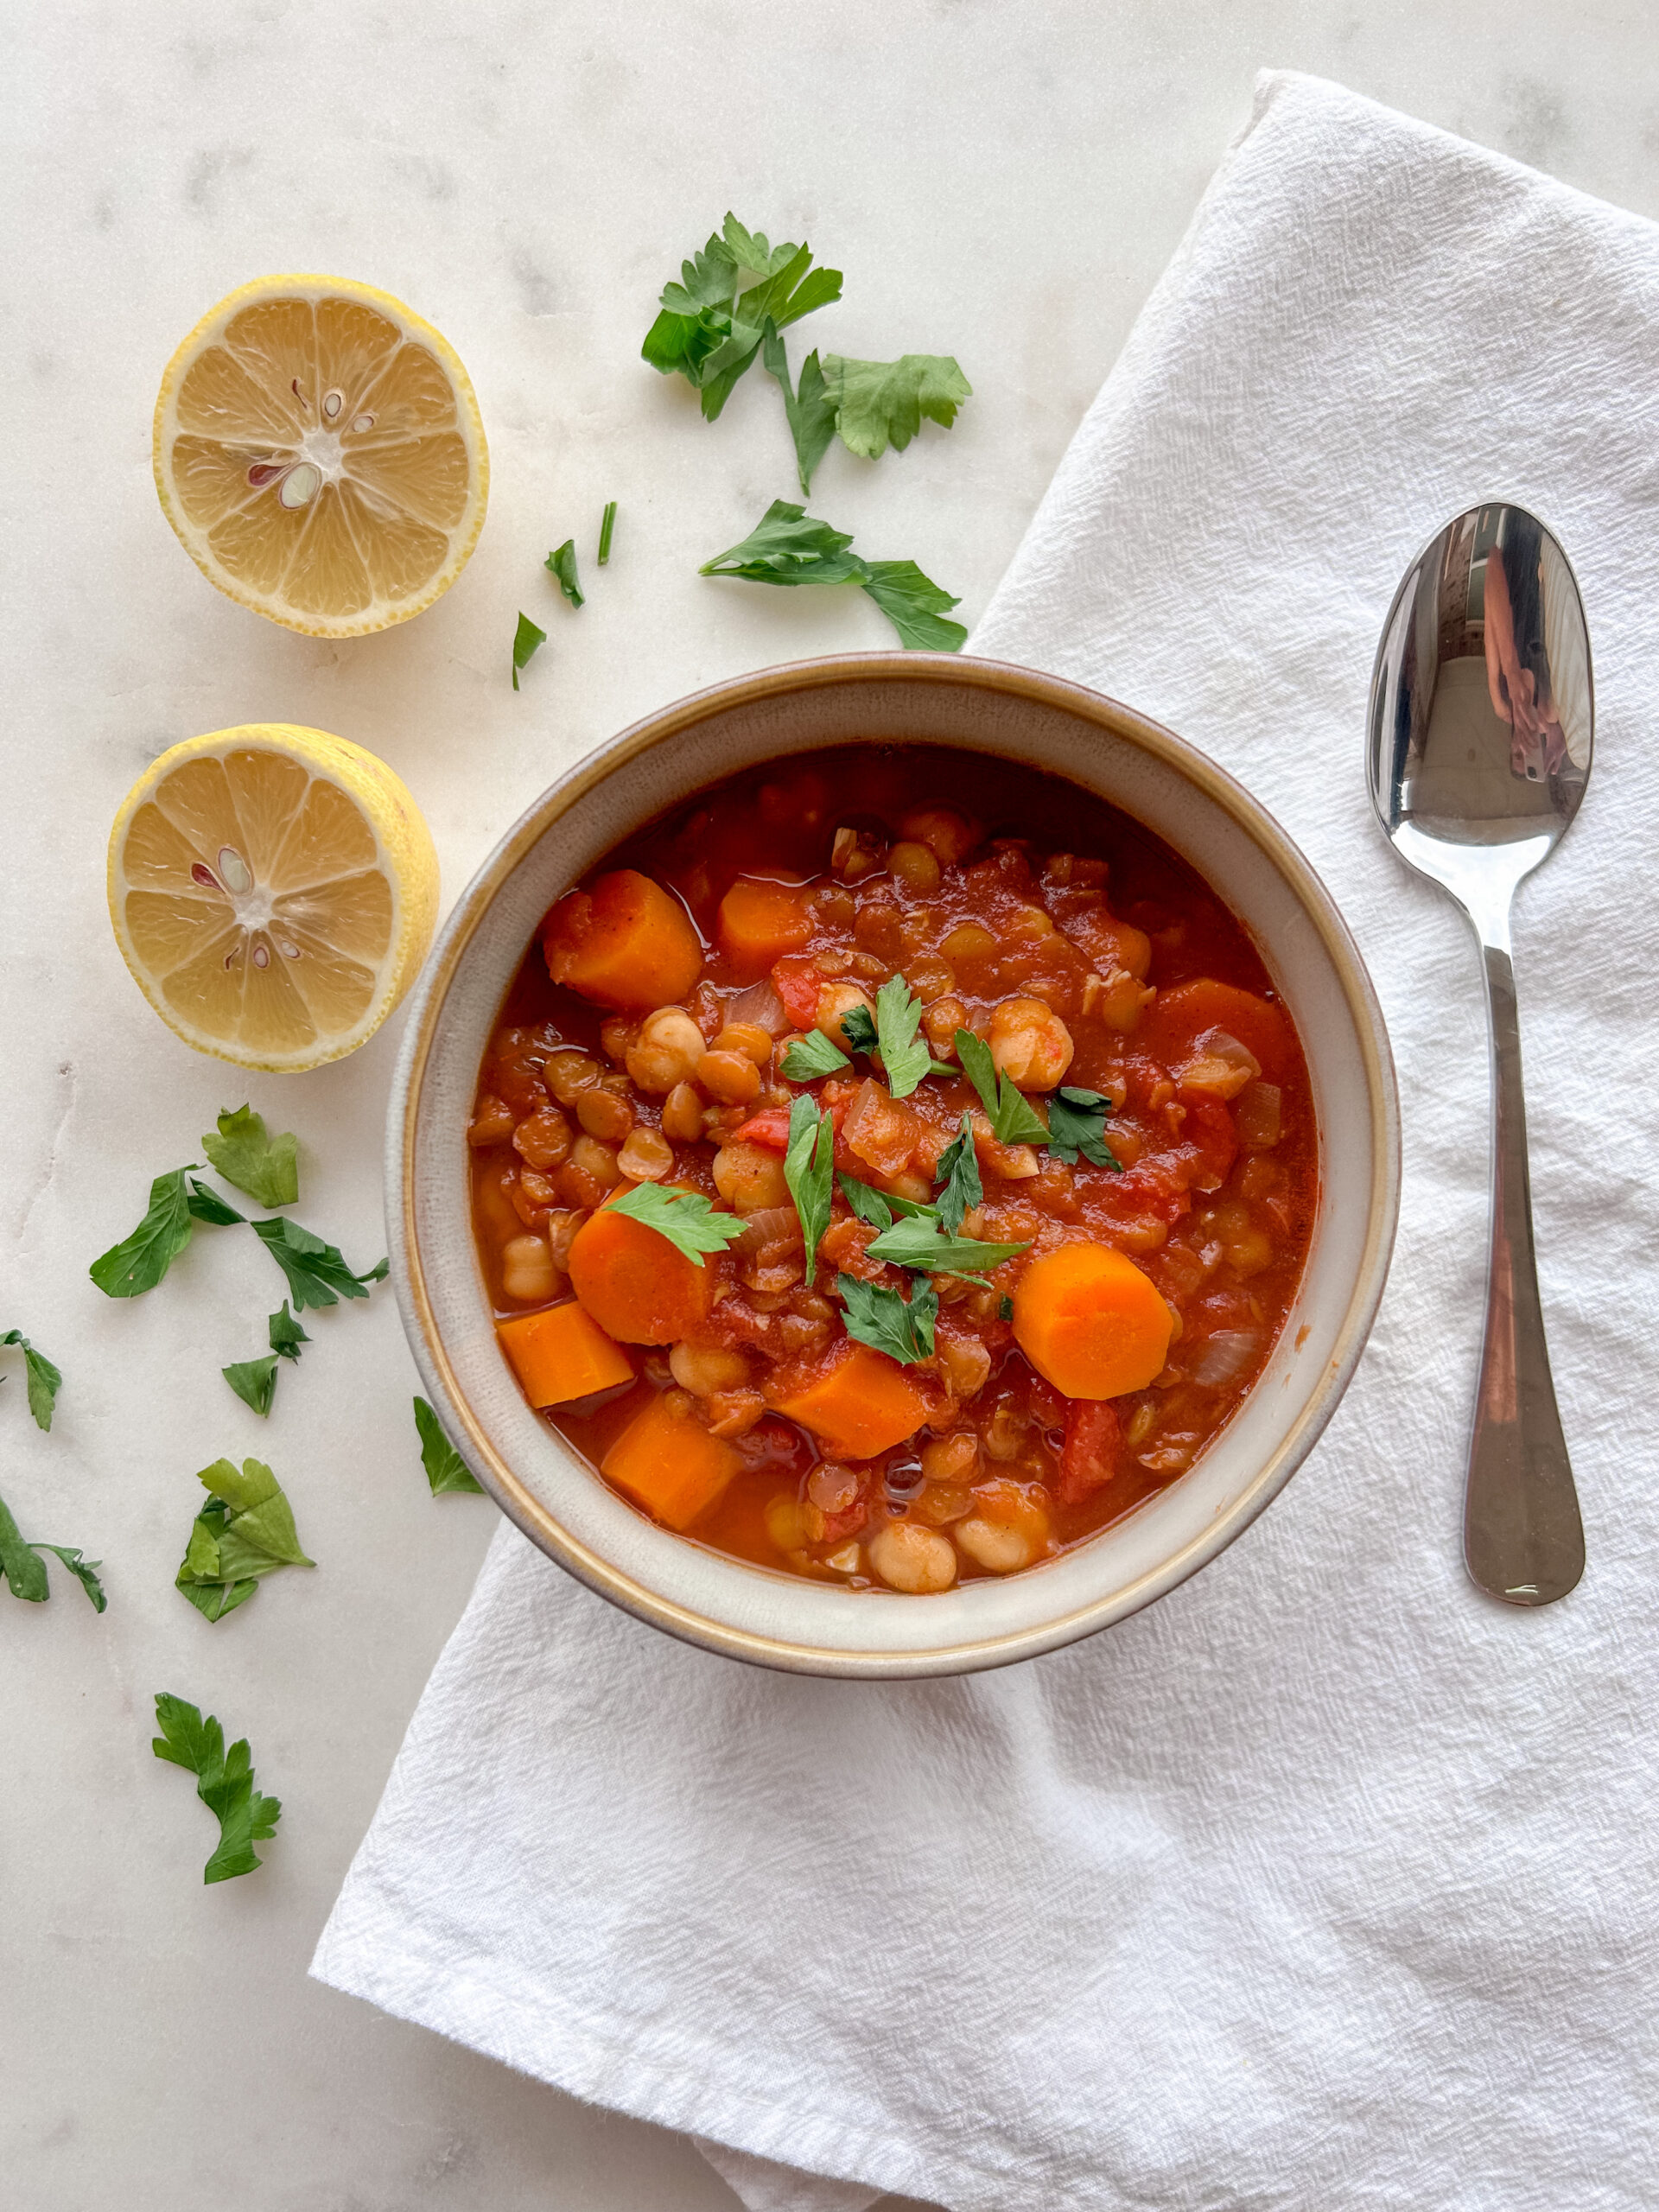 Moroccan Chickpea Stew with Lentils & Carrots